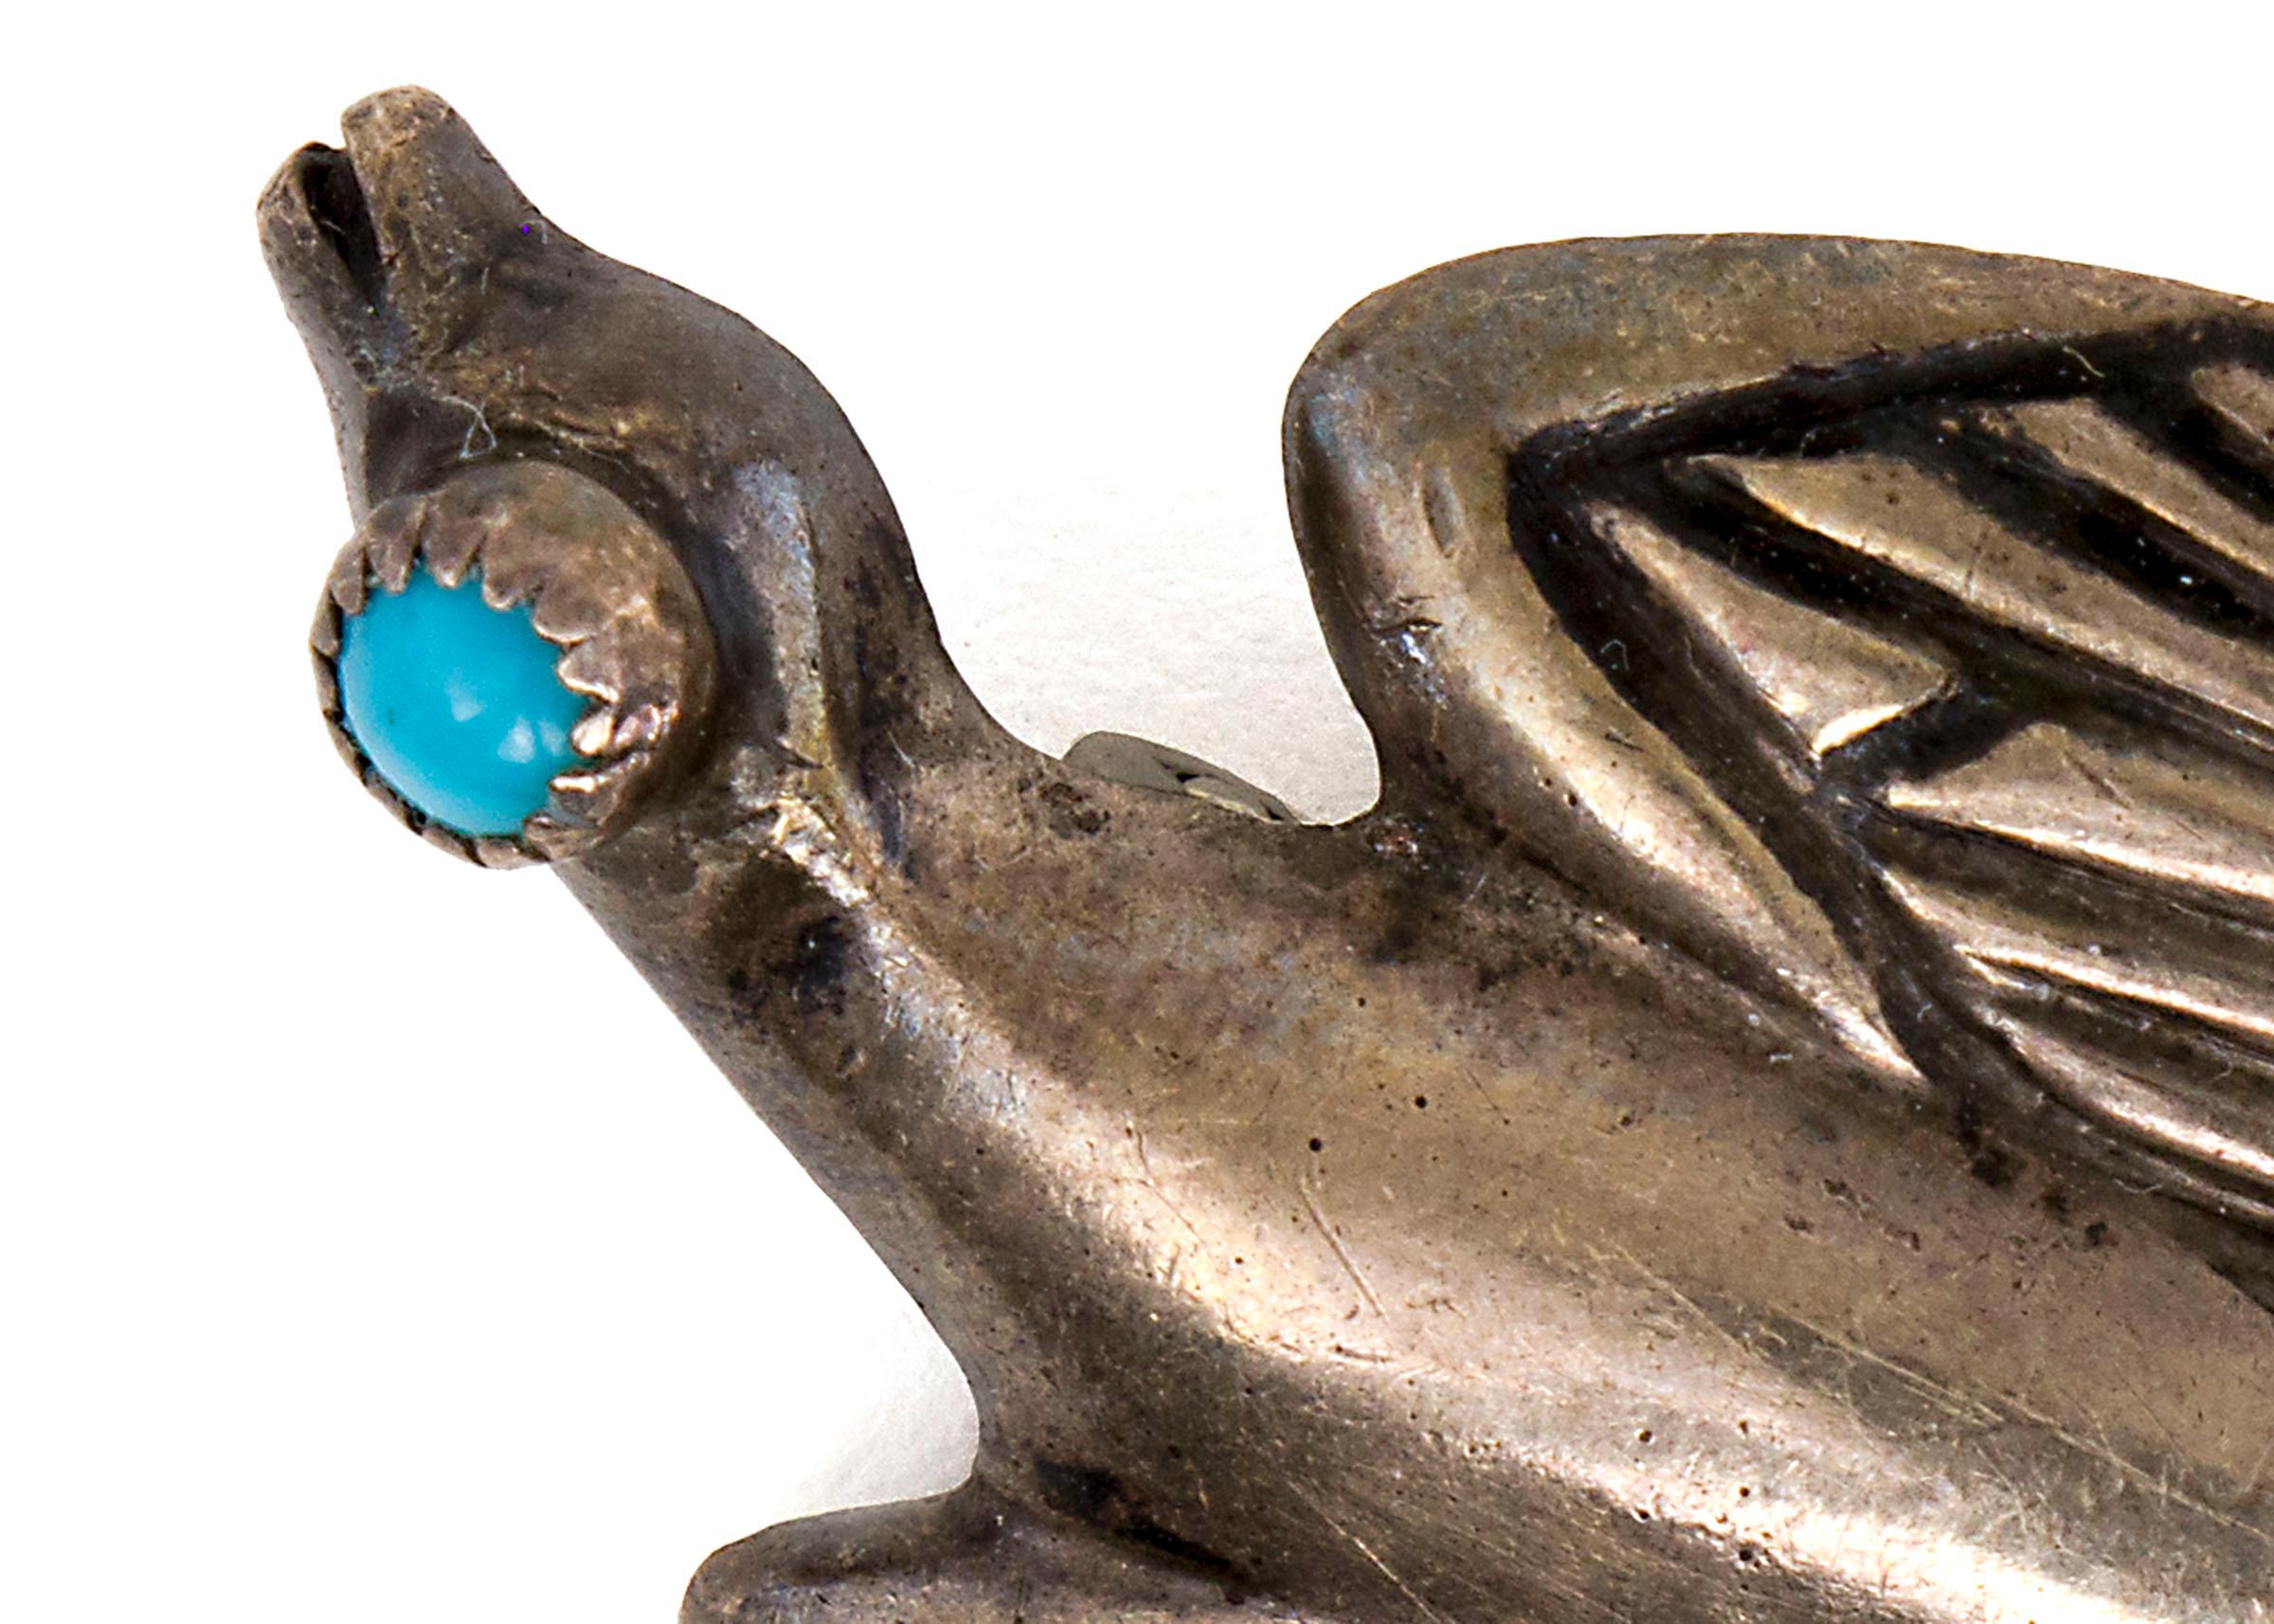 1950s silver pin in the shape of a peyote bird with a turquoise eye and detailed wings, measuring 2 x 1 inches. The pin features a small needle on the back for attachment. 

